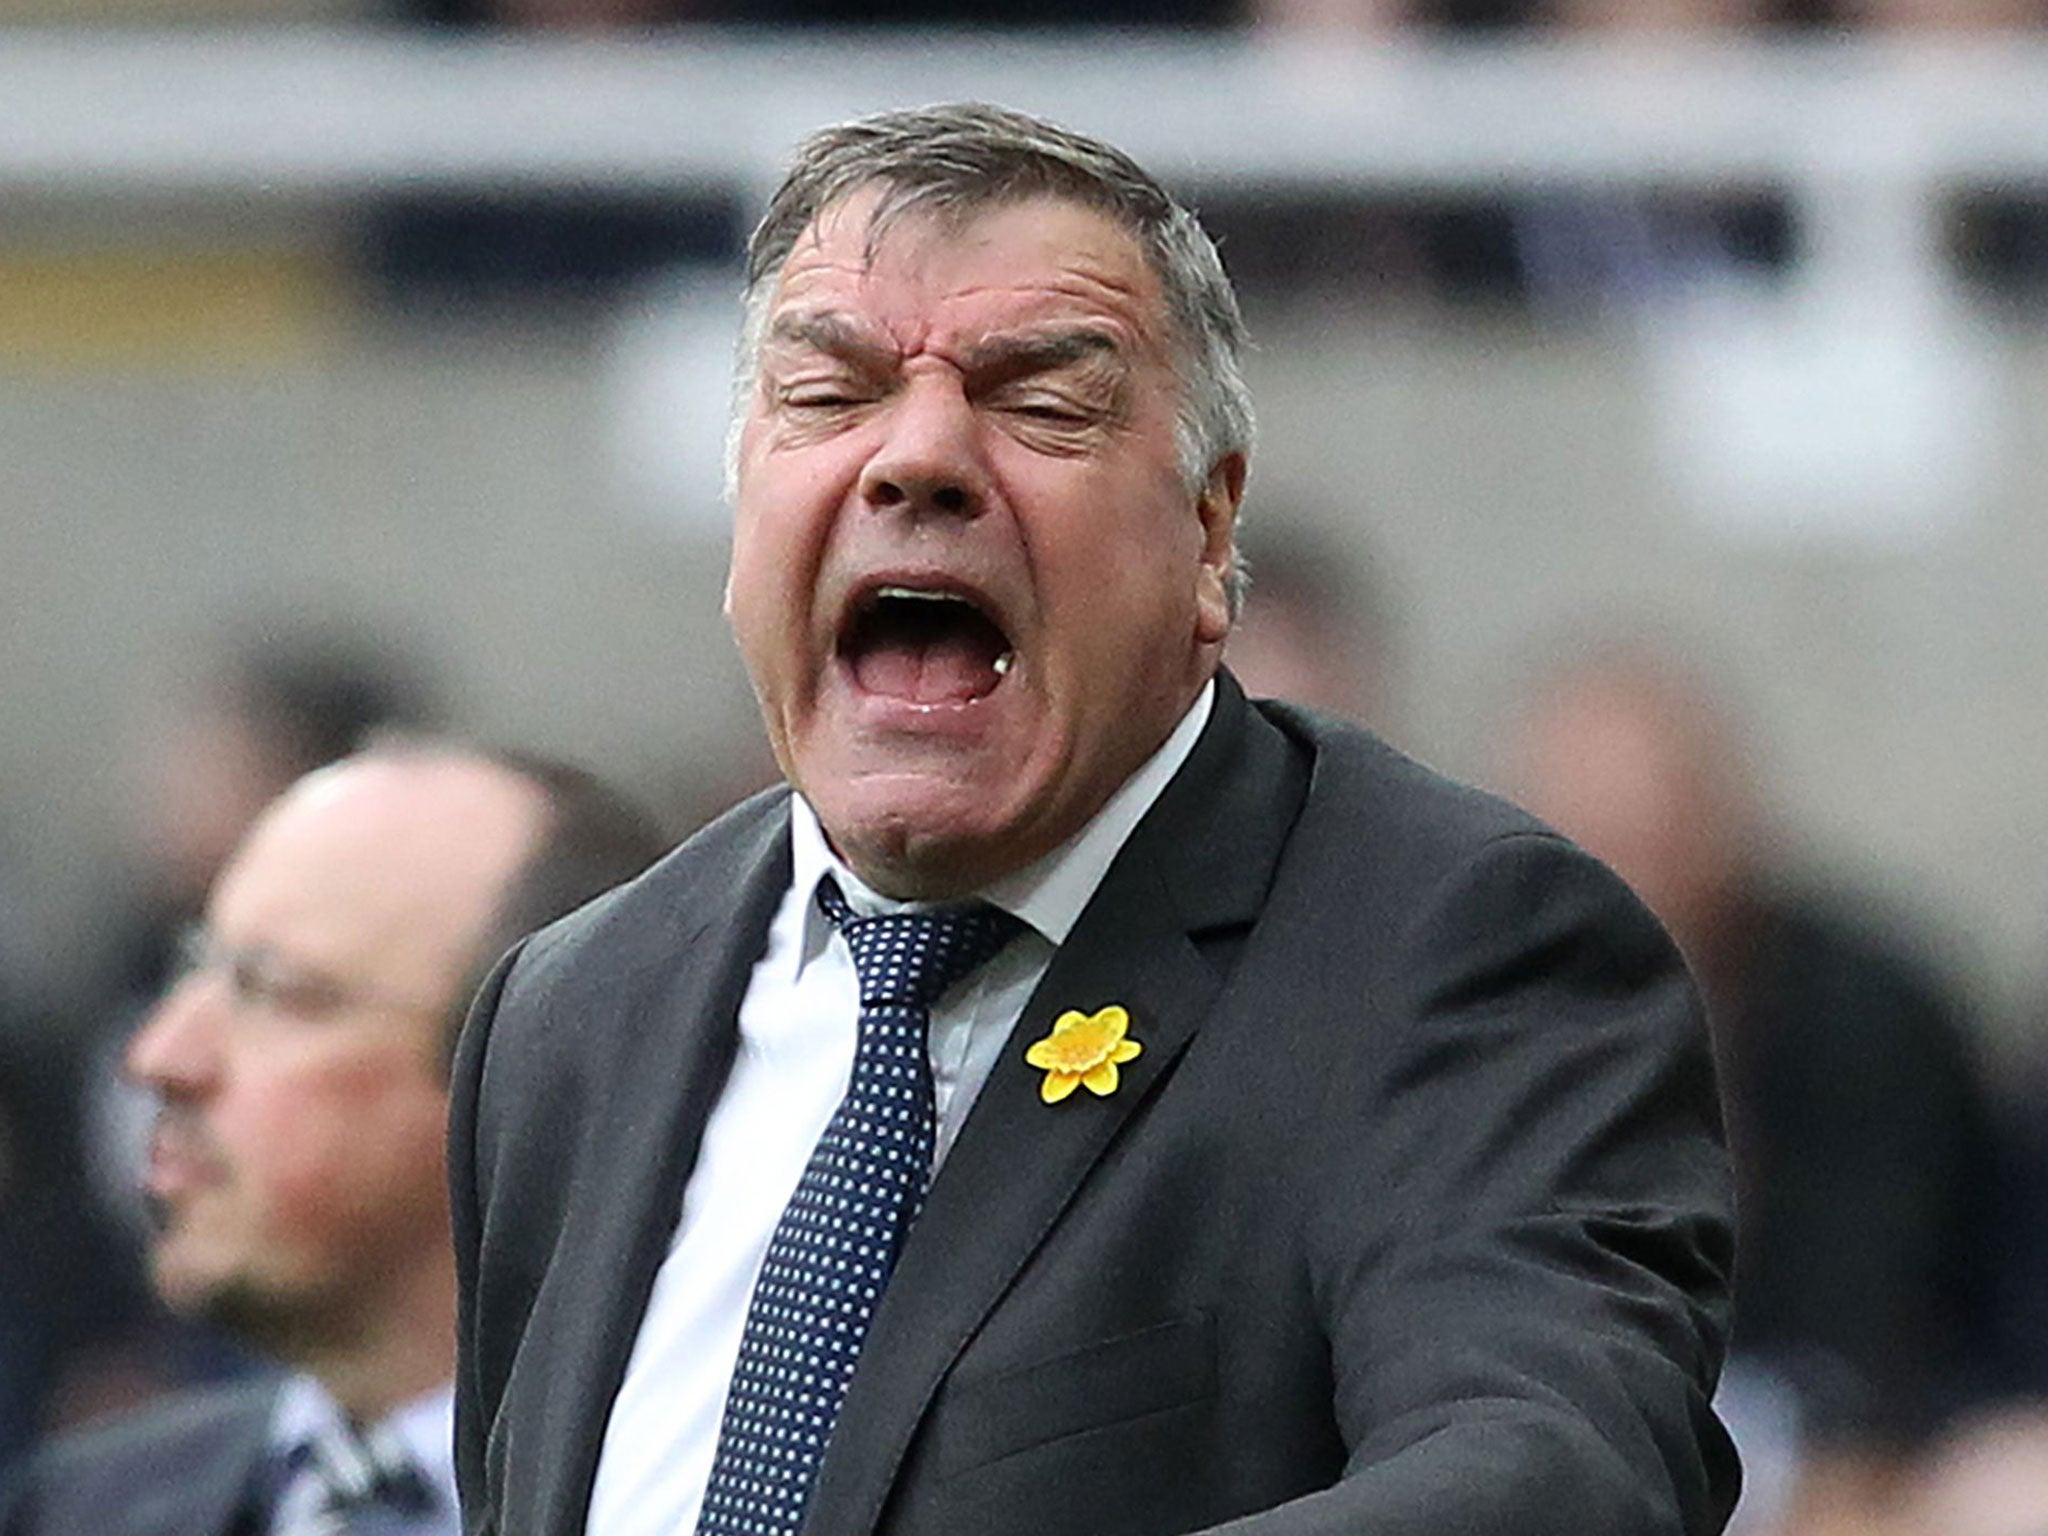 Sam Allardyce will have seen hopeful signs in his Sunderland side’s first-half performance